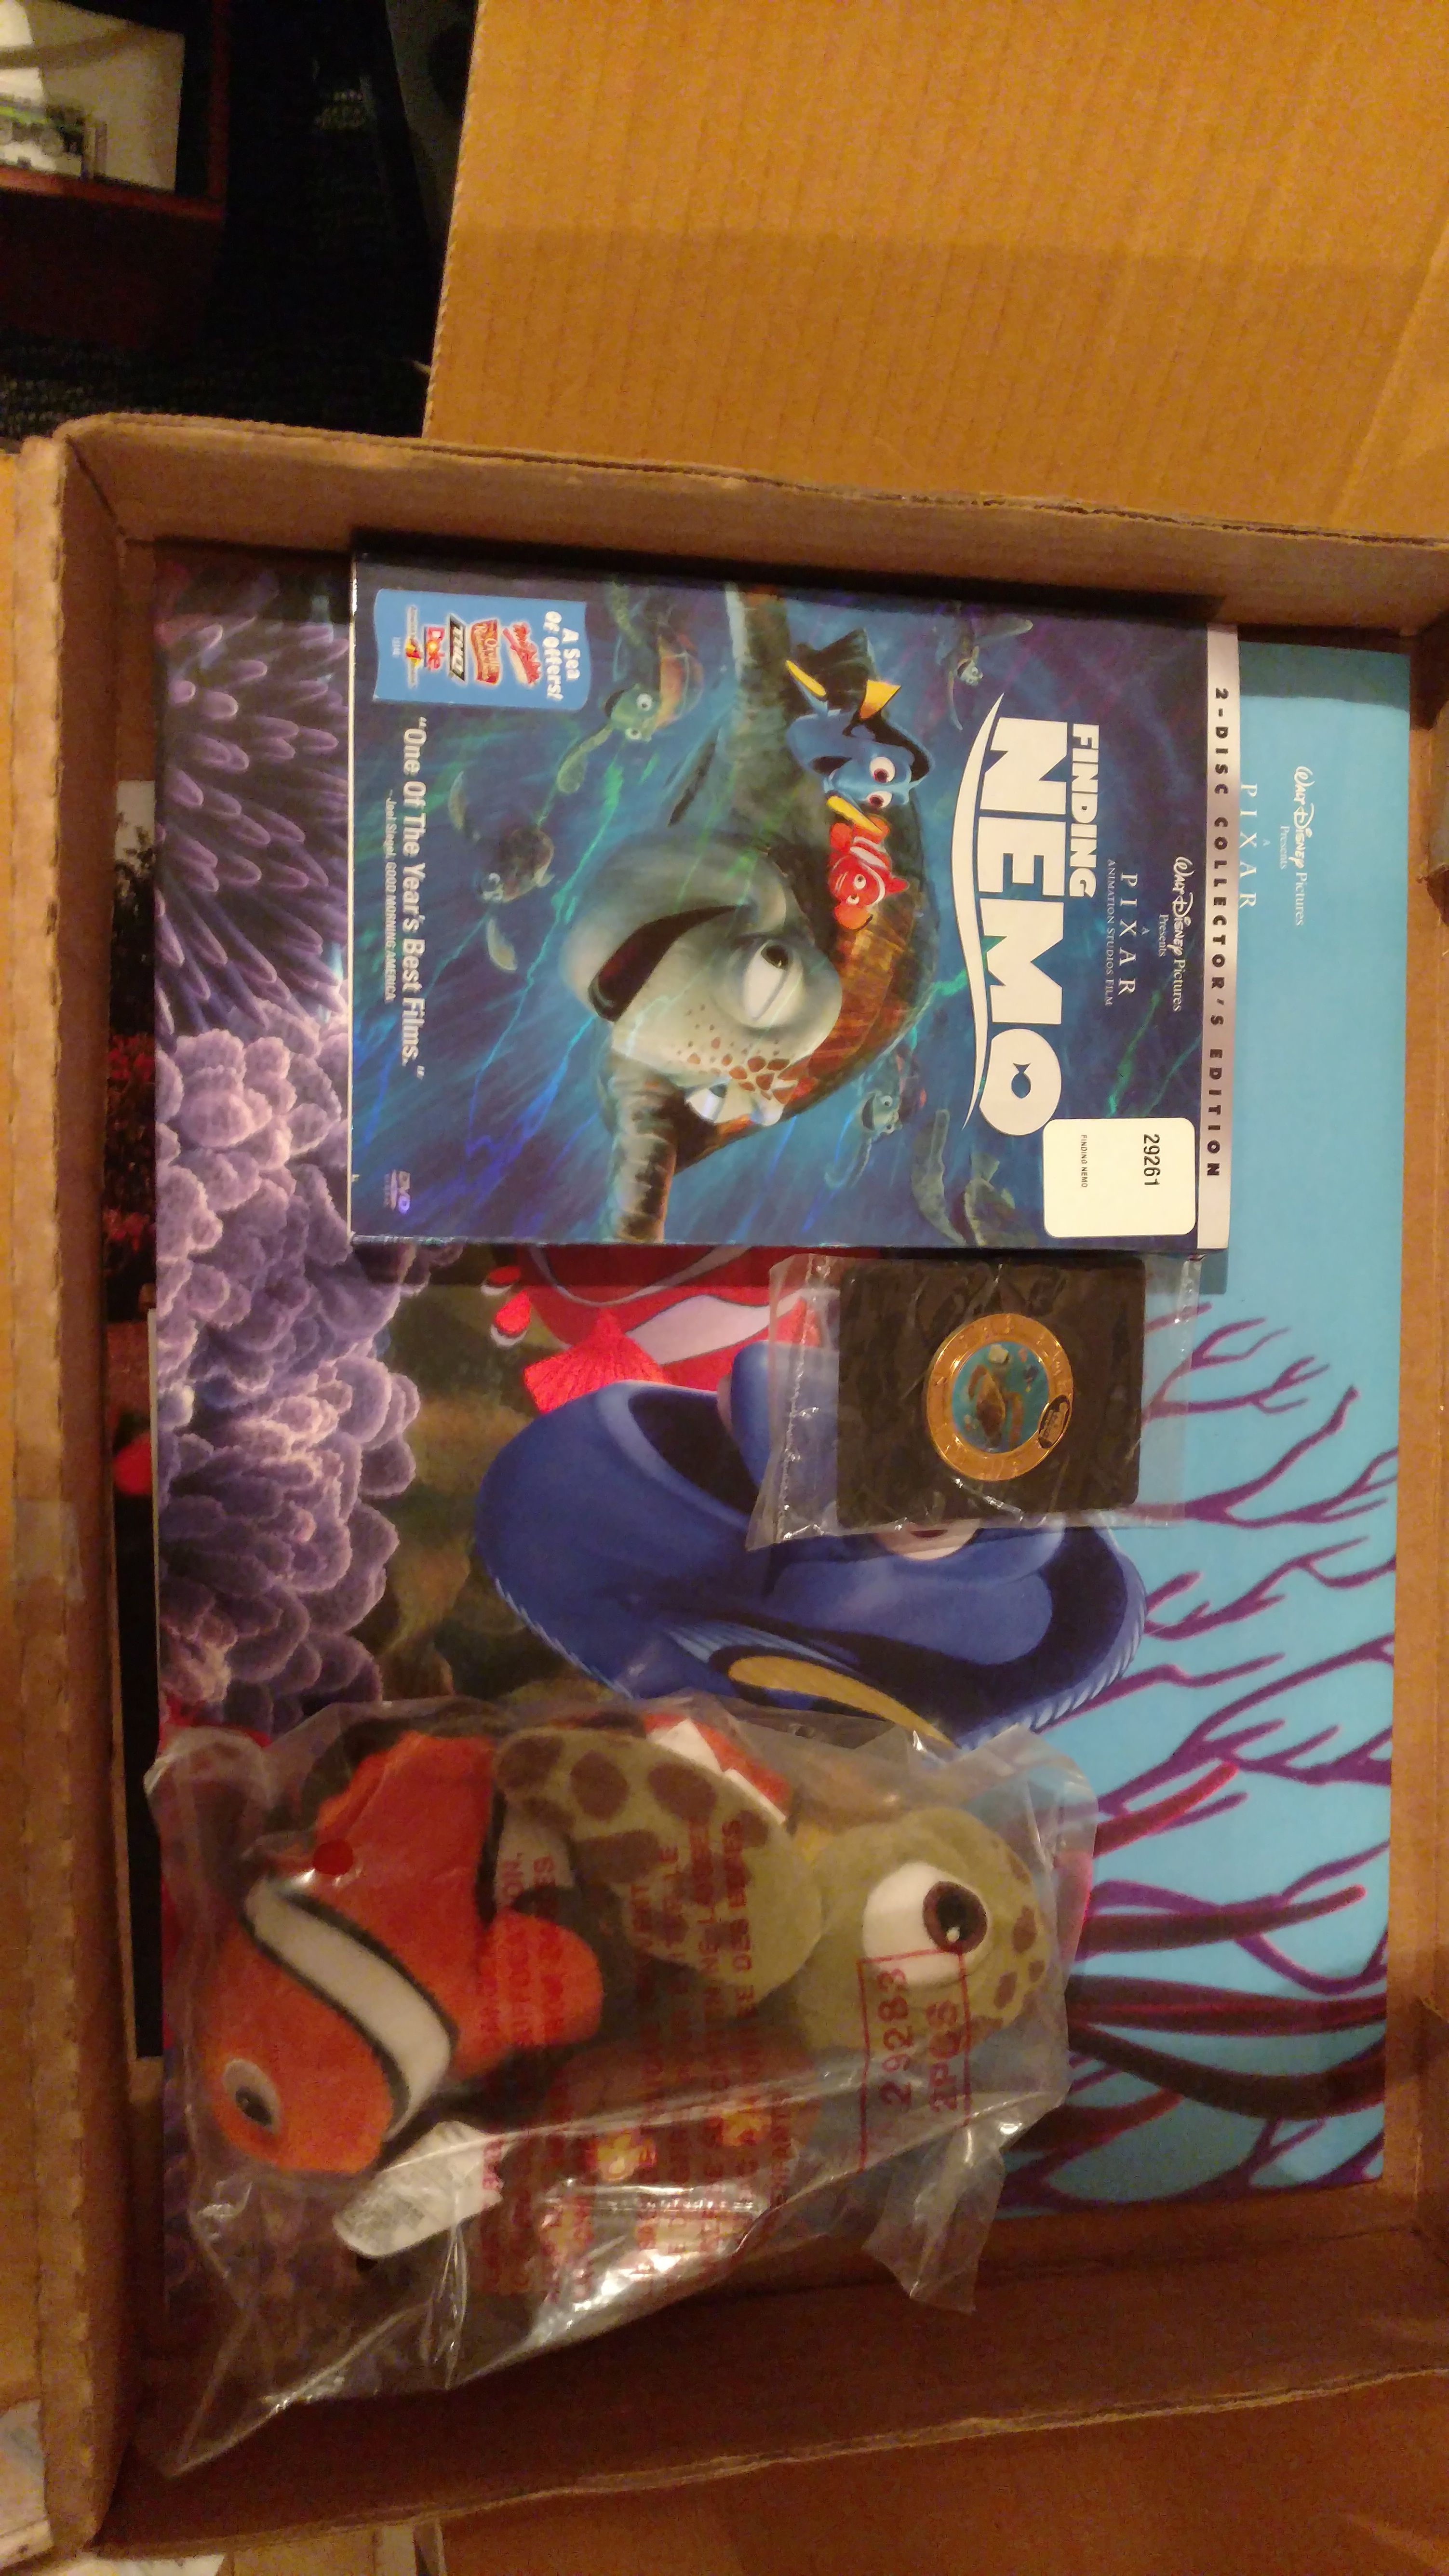 Nemo kit collectibles by Disney